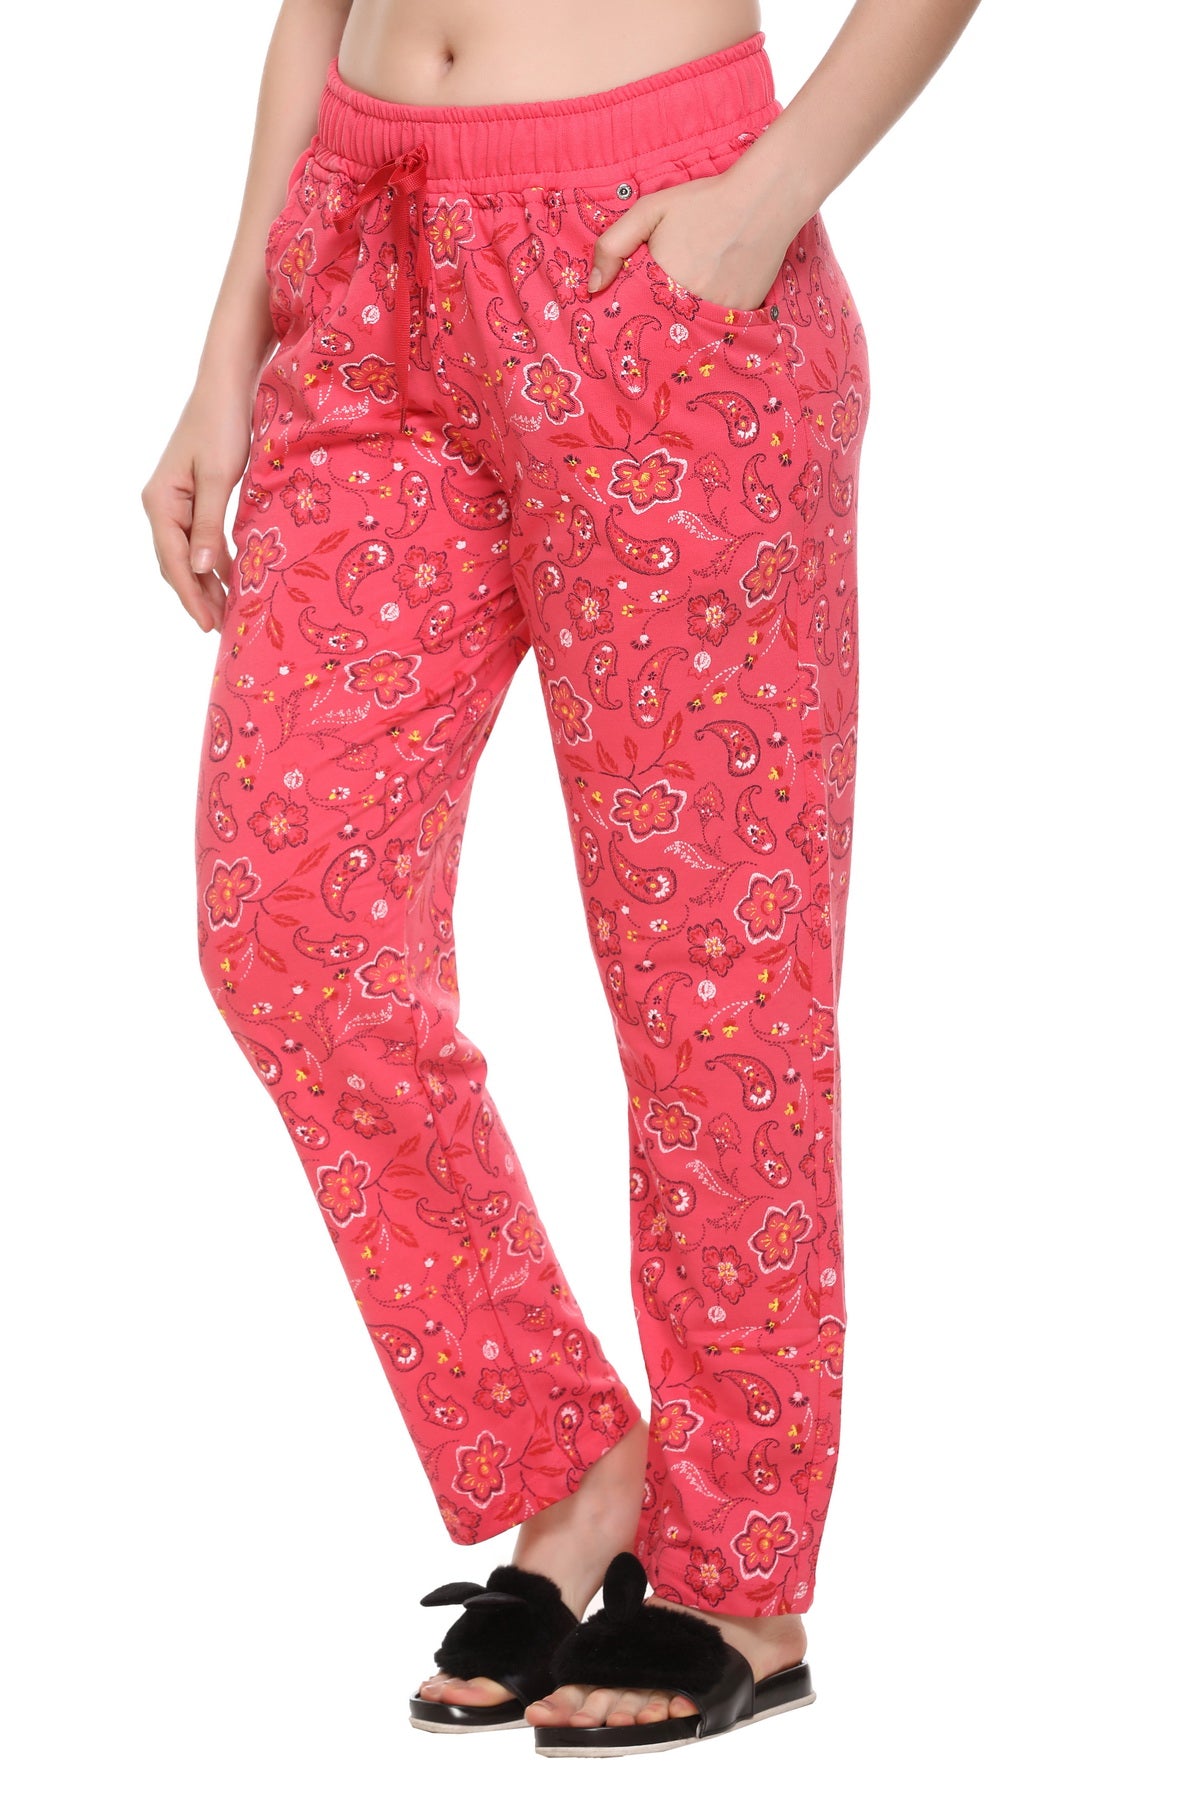 Cupid All Over Printed lounge Pants for Women